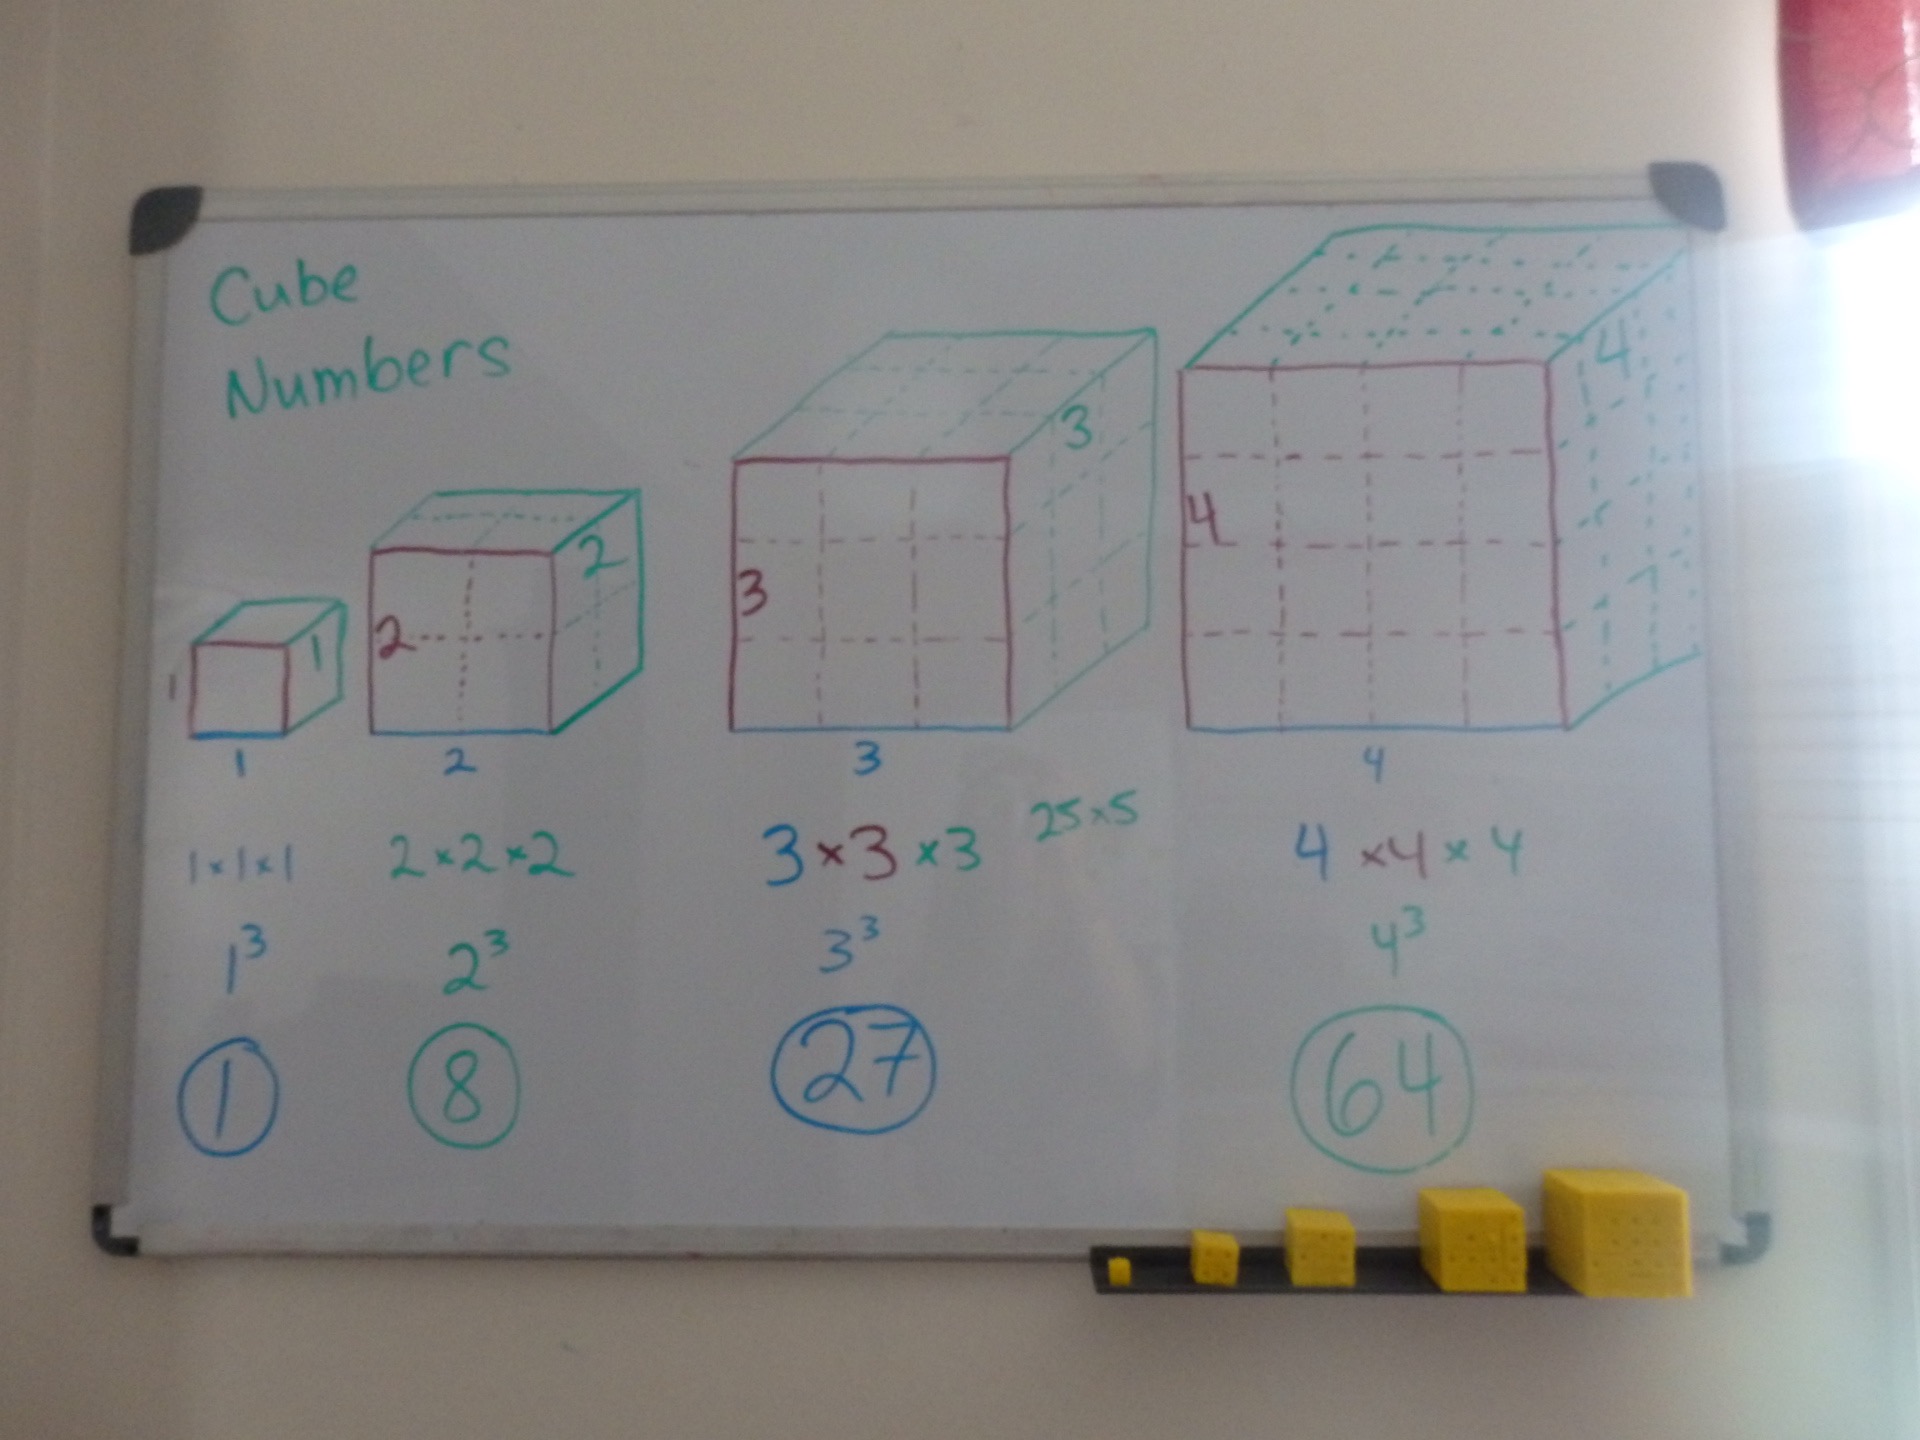 drawings of cubes of different sizes